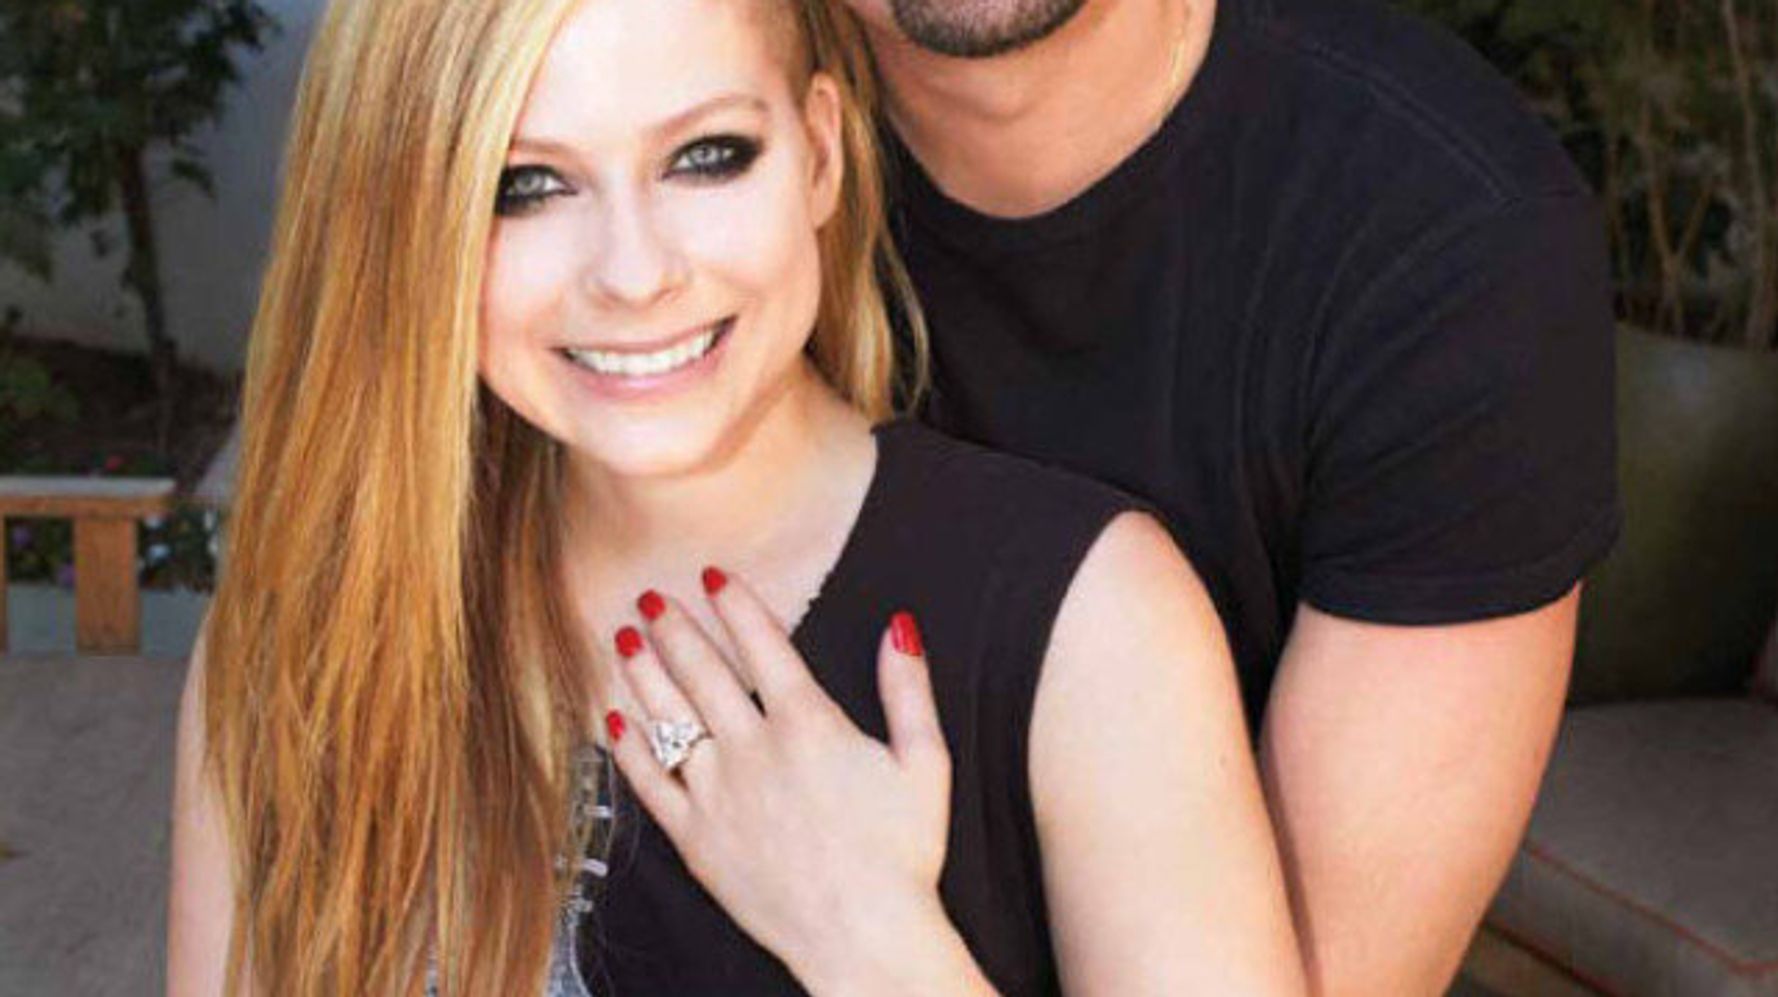 Avril Lavigne Engagement Photos Singer Shows Off Huge Ring In Hello Canada Magazine Spread 